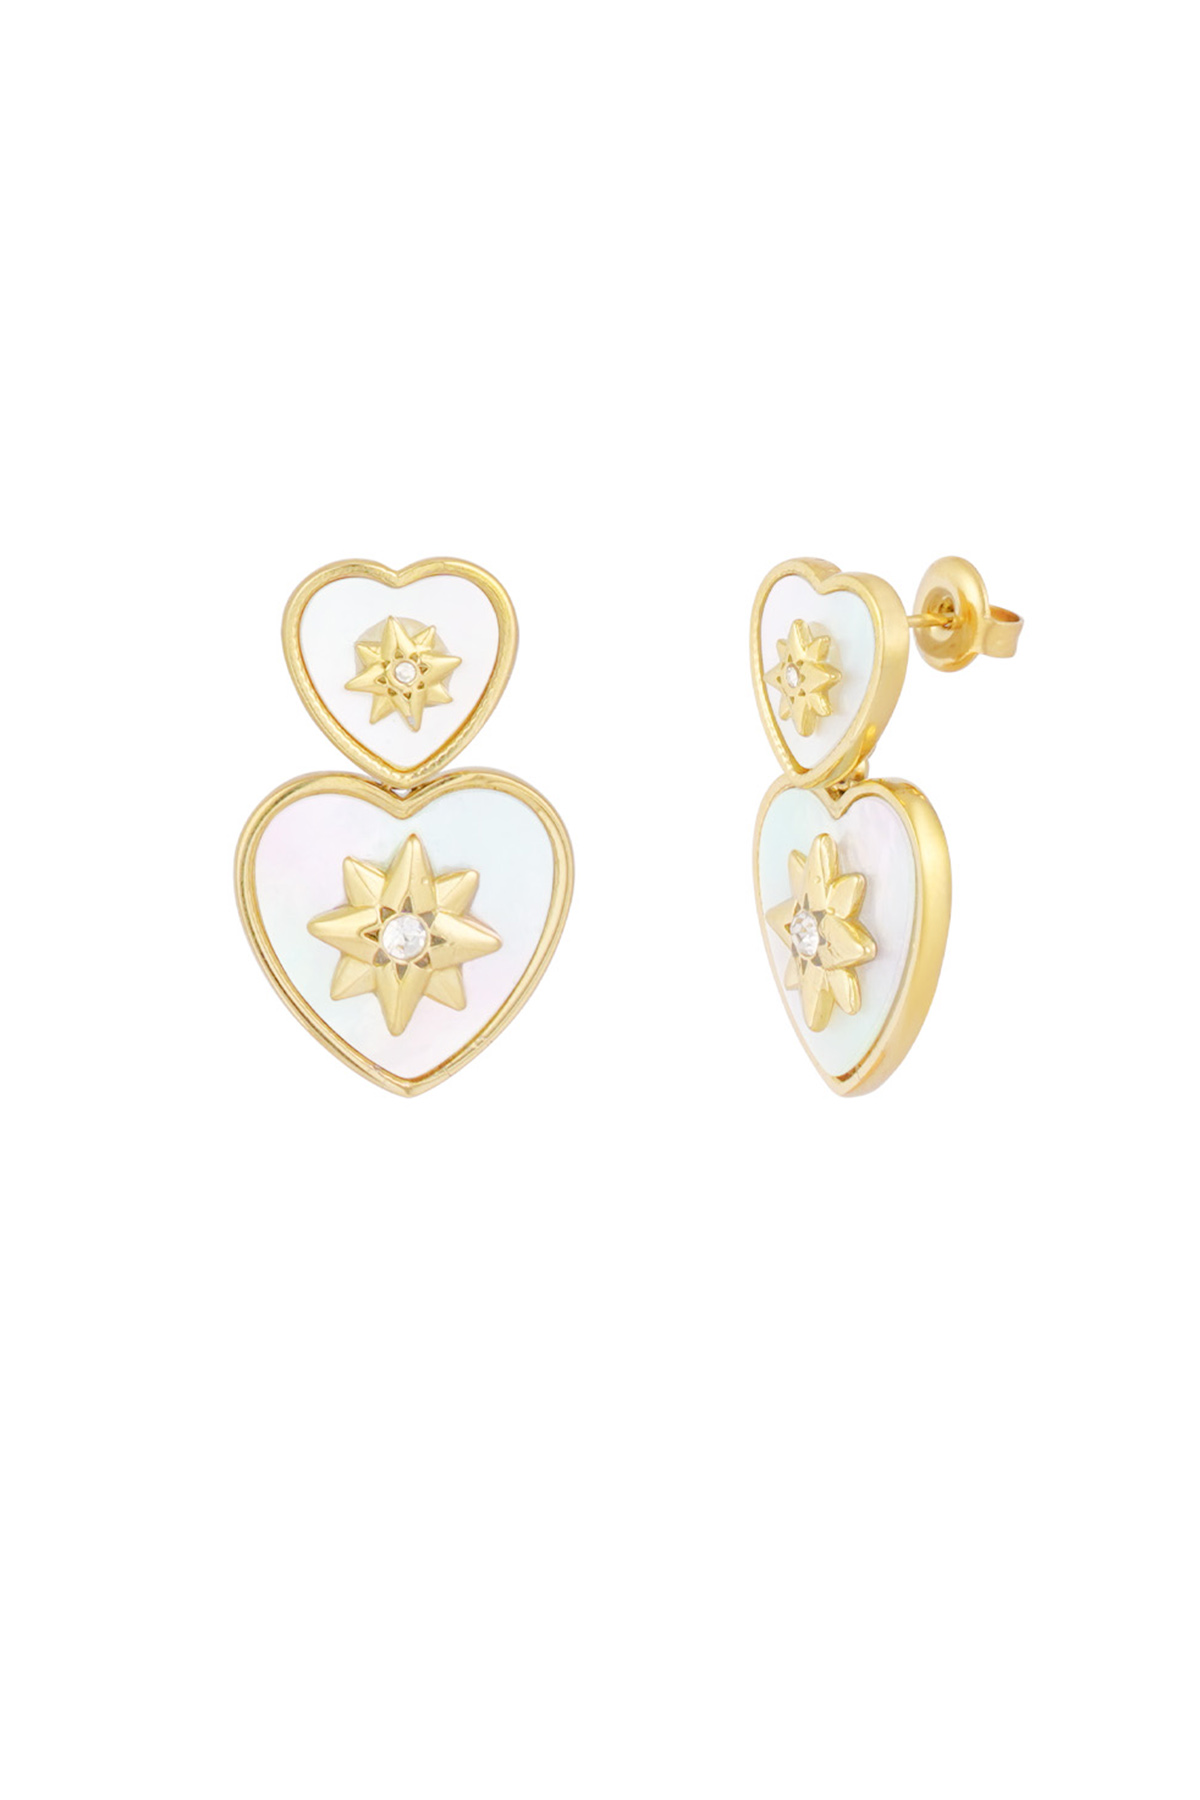 Heart earrings with star - white gold